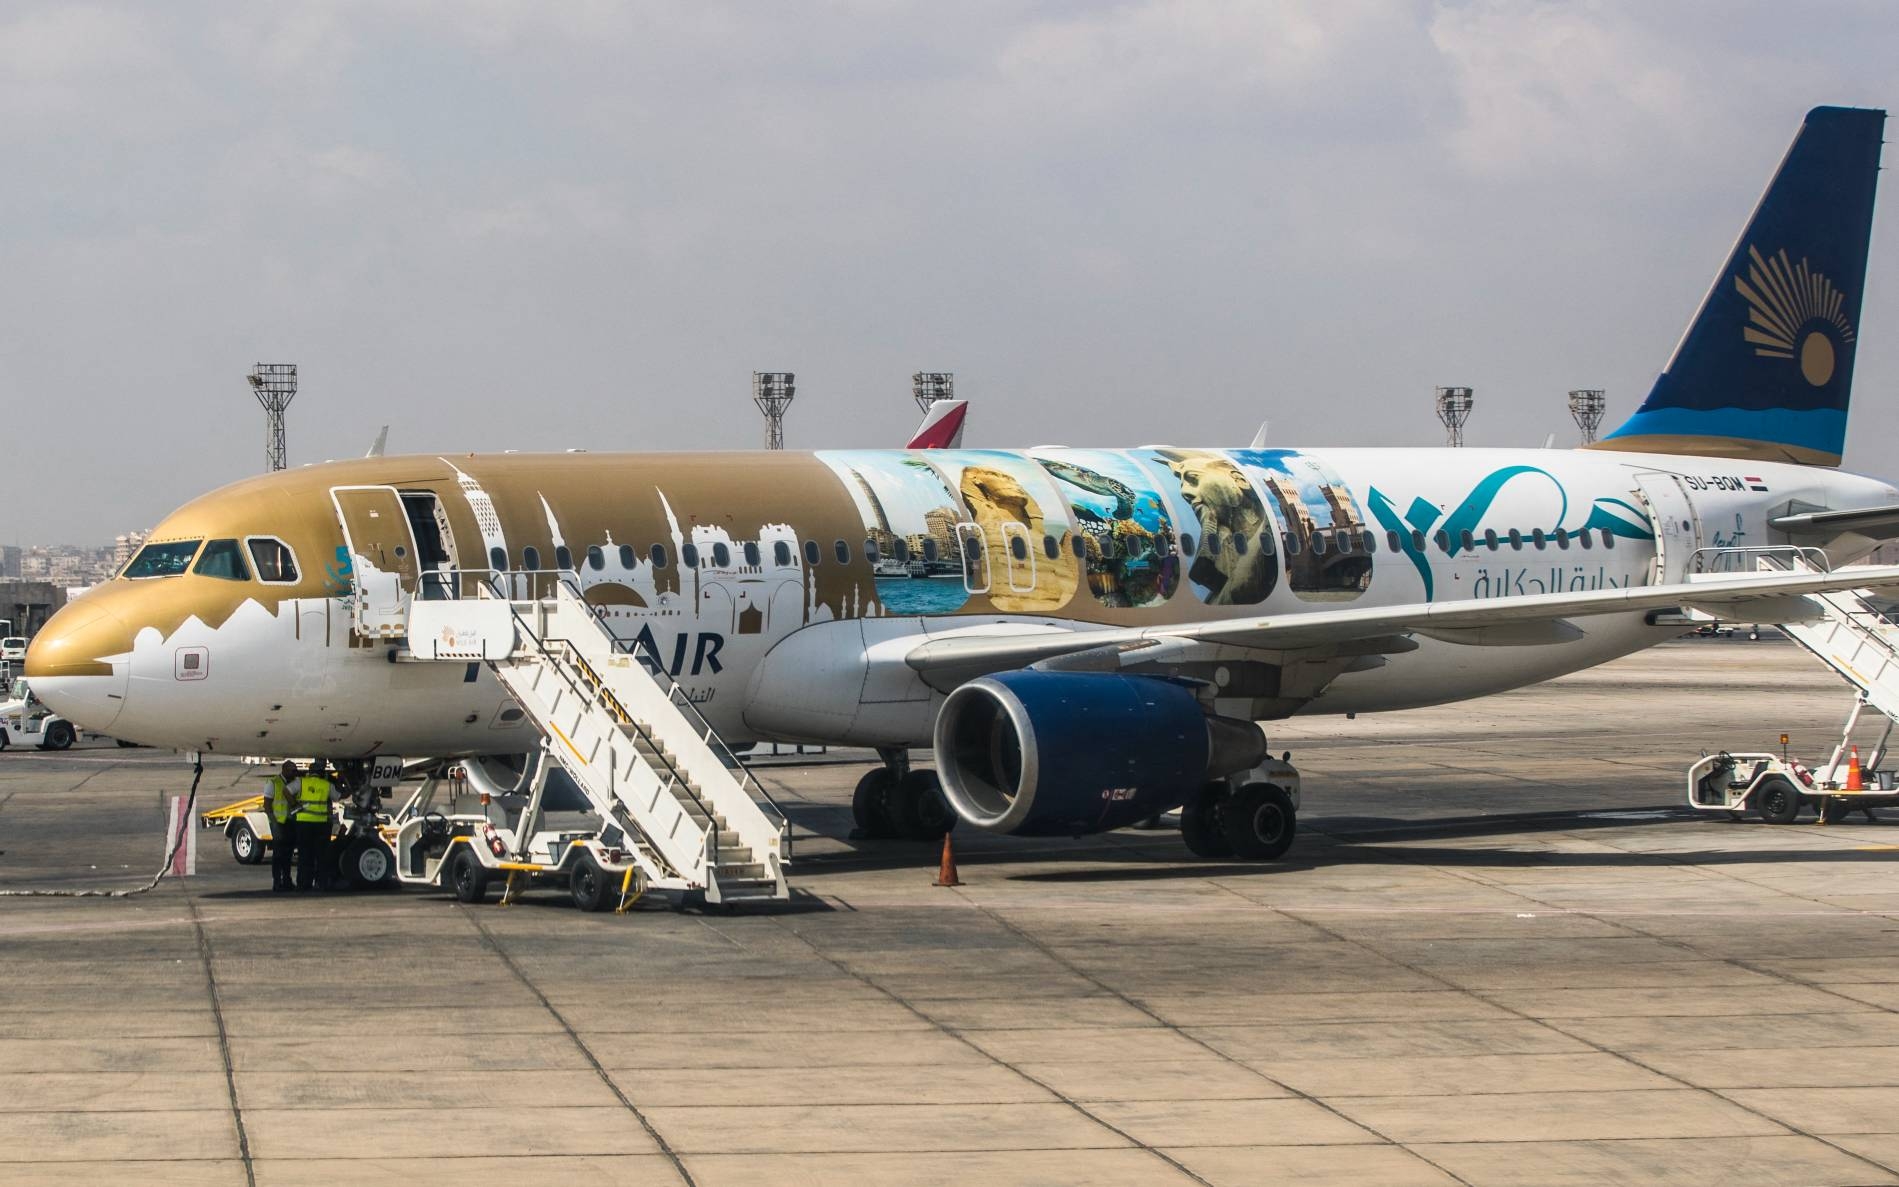 Airbus A320 aircraft of Nile Air, Egypt's largest private airline and second largest operator, on the tarmac at Cairo International Airport, 27 September 2021 (AFP)